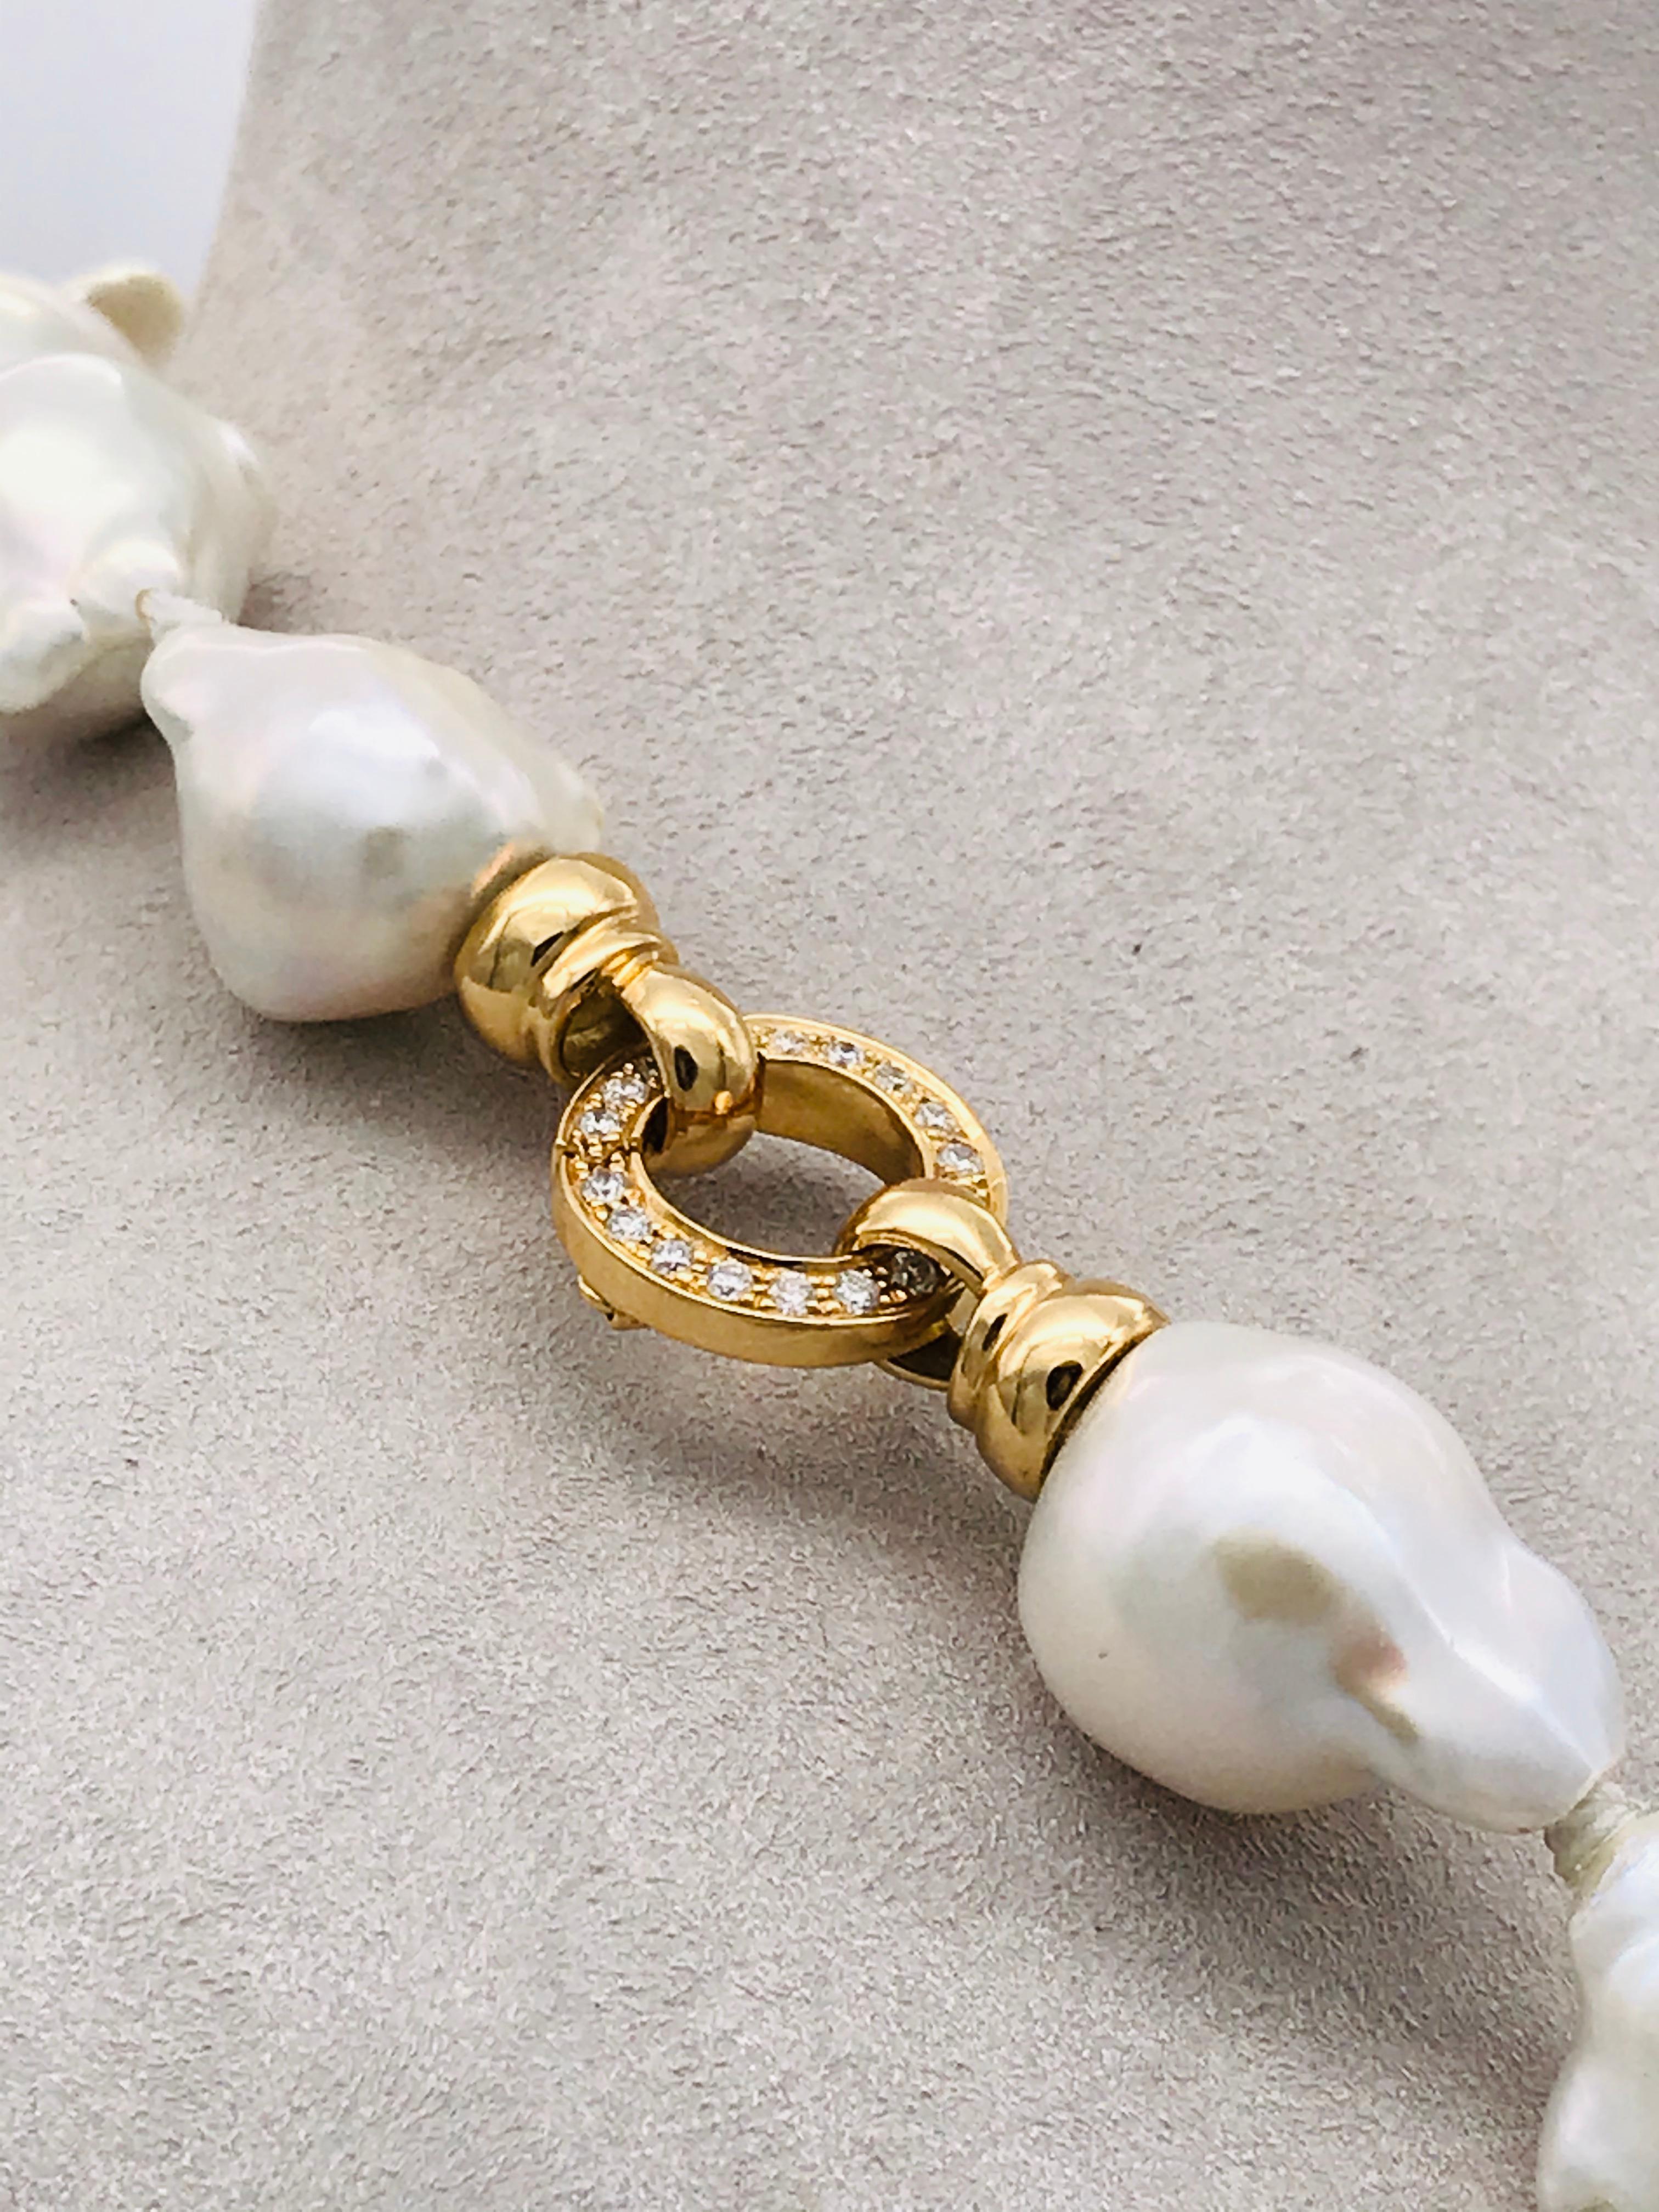 Baroques Pearls Necklaces with Gold and Diamonds Clasp 4